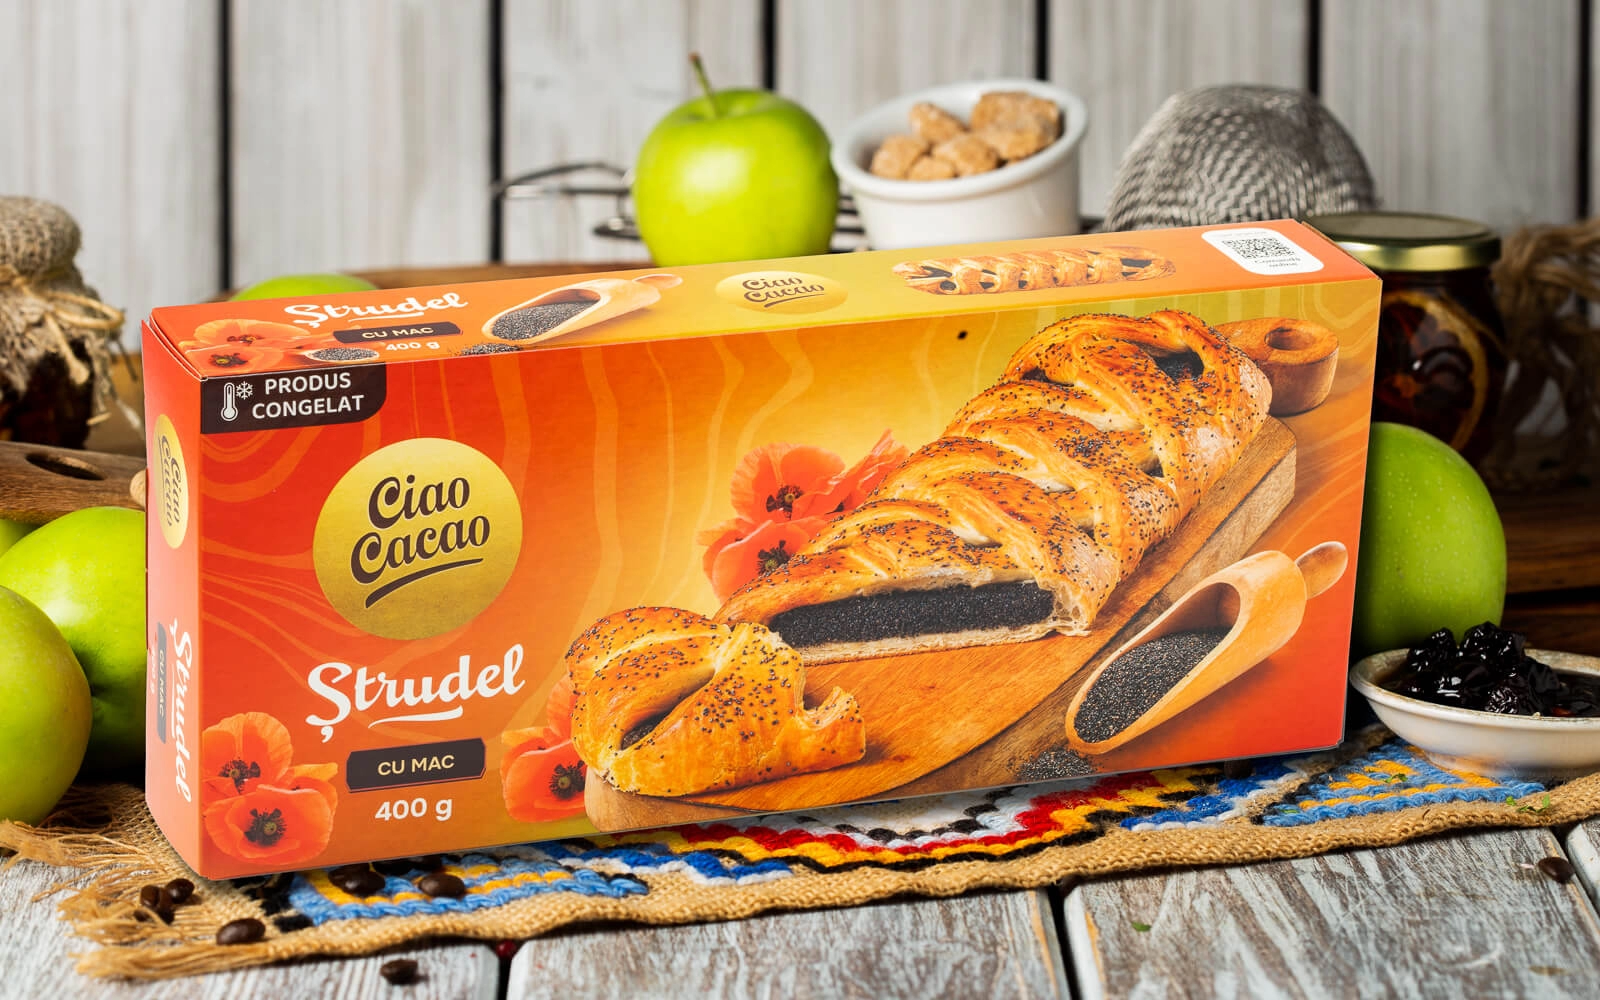 Frozen product. Strudel with poppy seeds